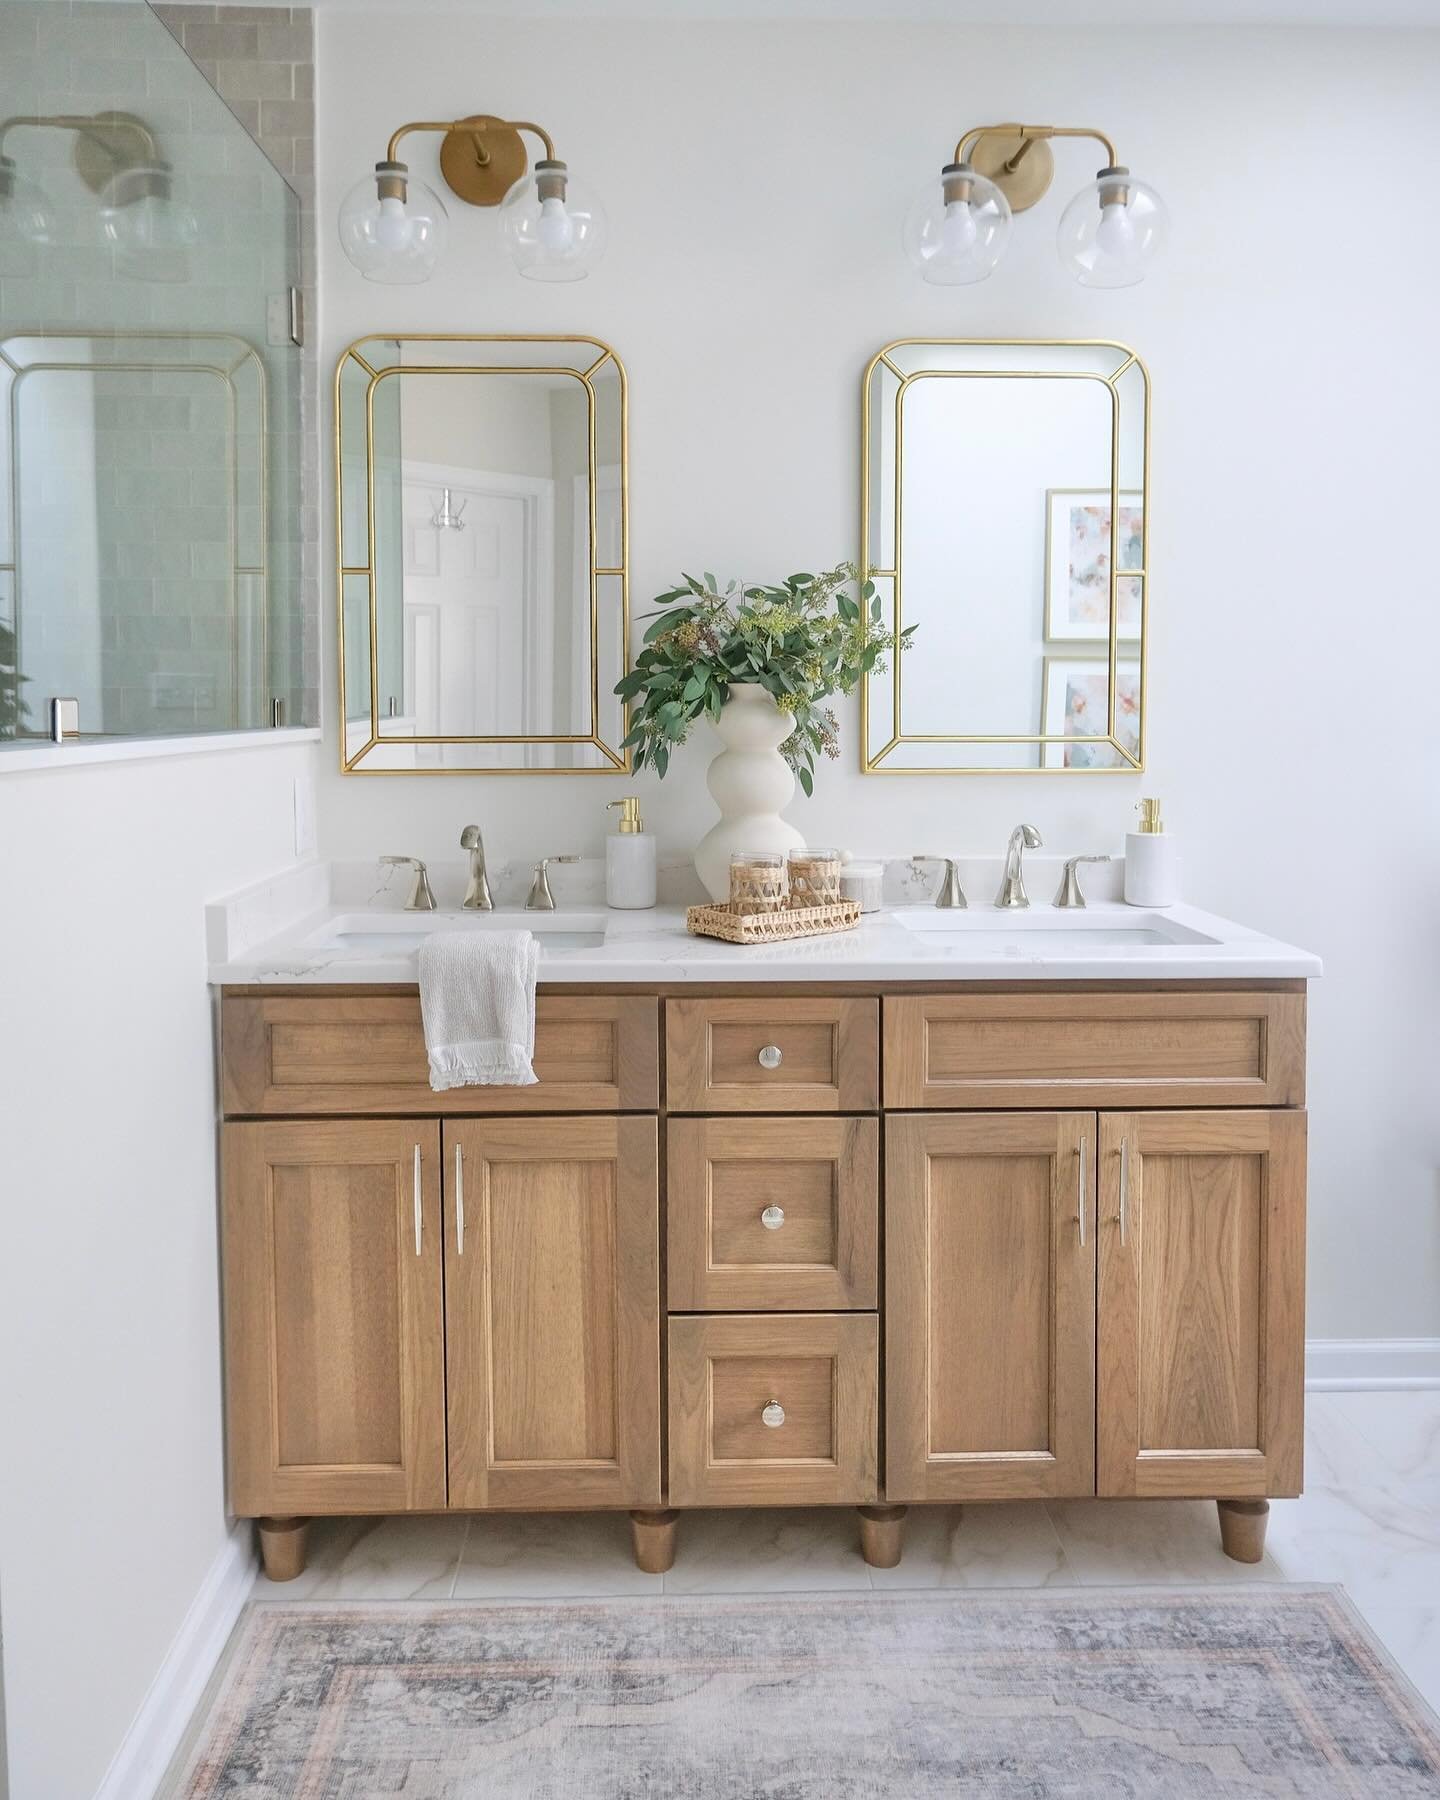 This is one of my favorite bathroom projects to date. What an amazing transformation! We took this primary bathroom from dark and outdated to bright and beautiful. It is truly an oasis. Swipe through to see the before photos. Photo credit: @natbirdph